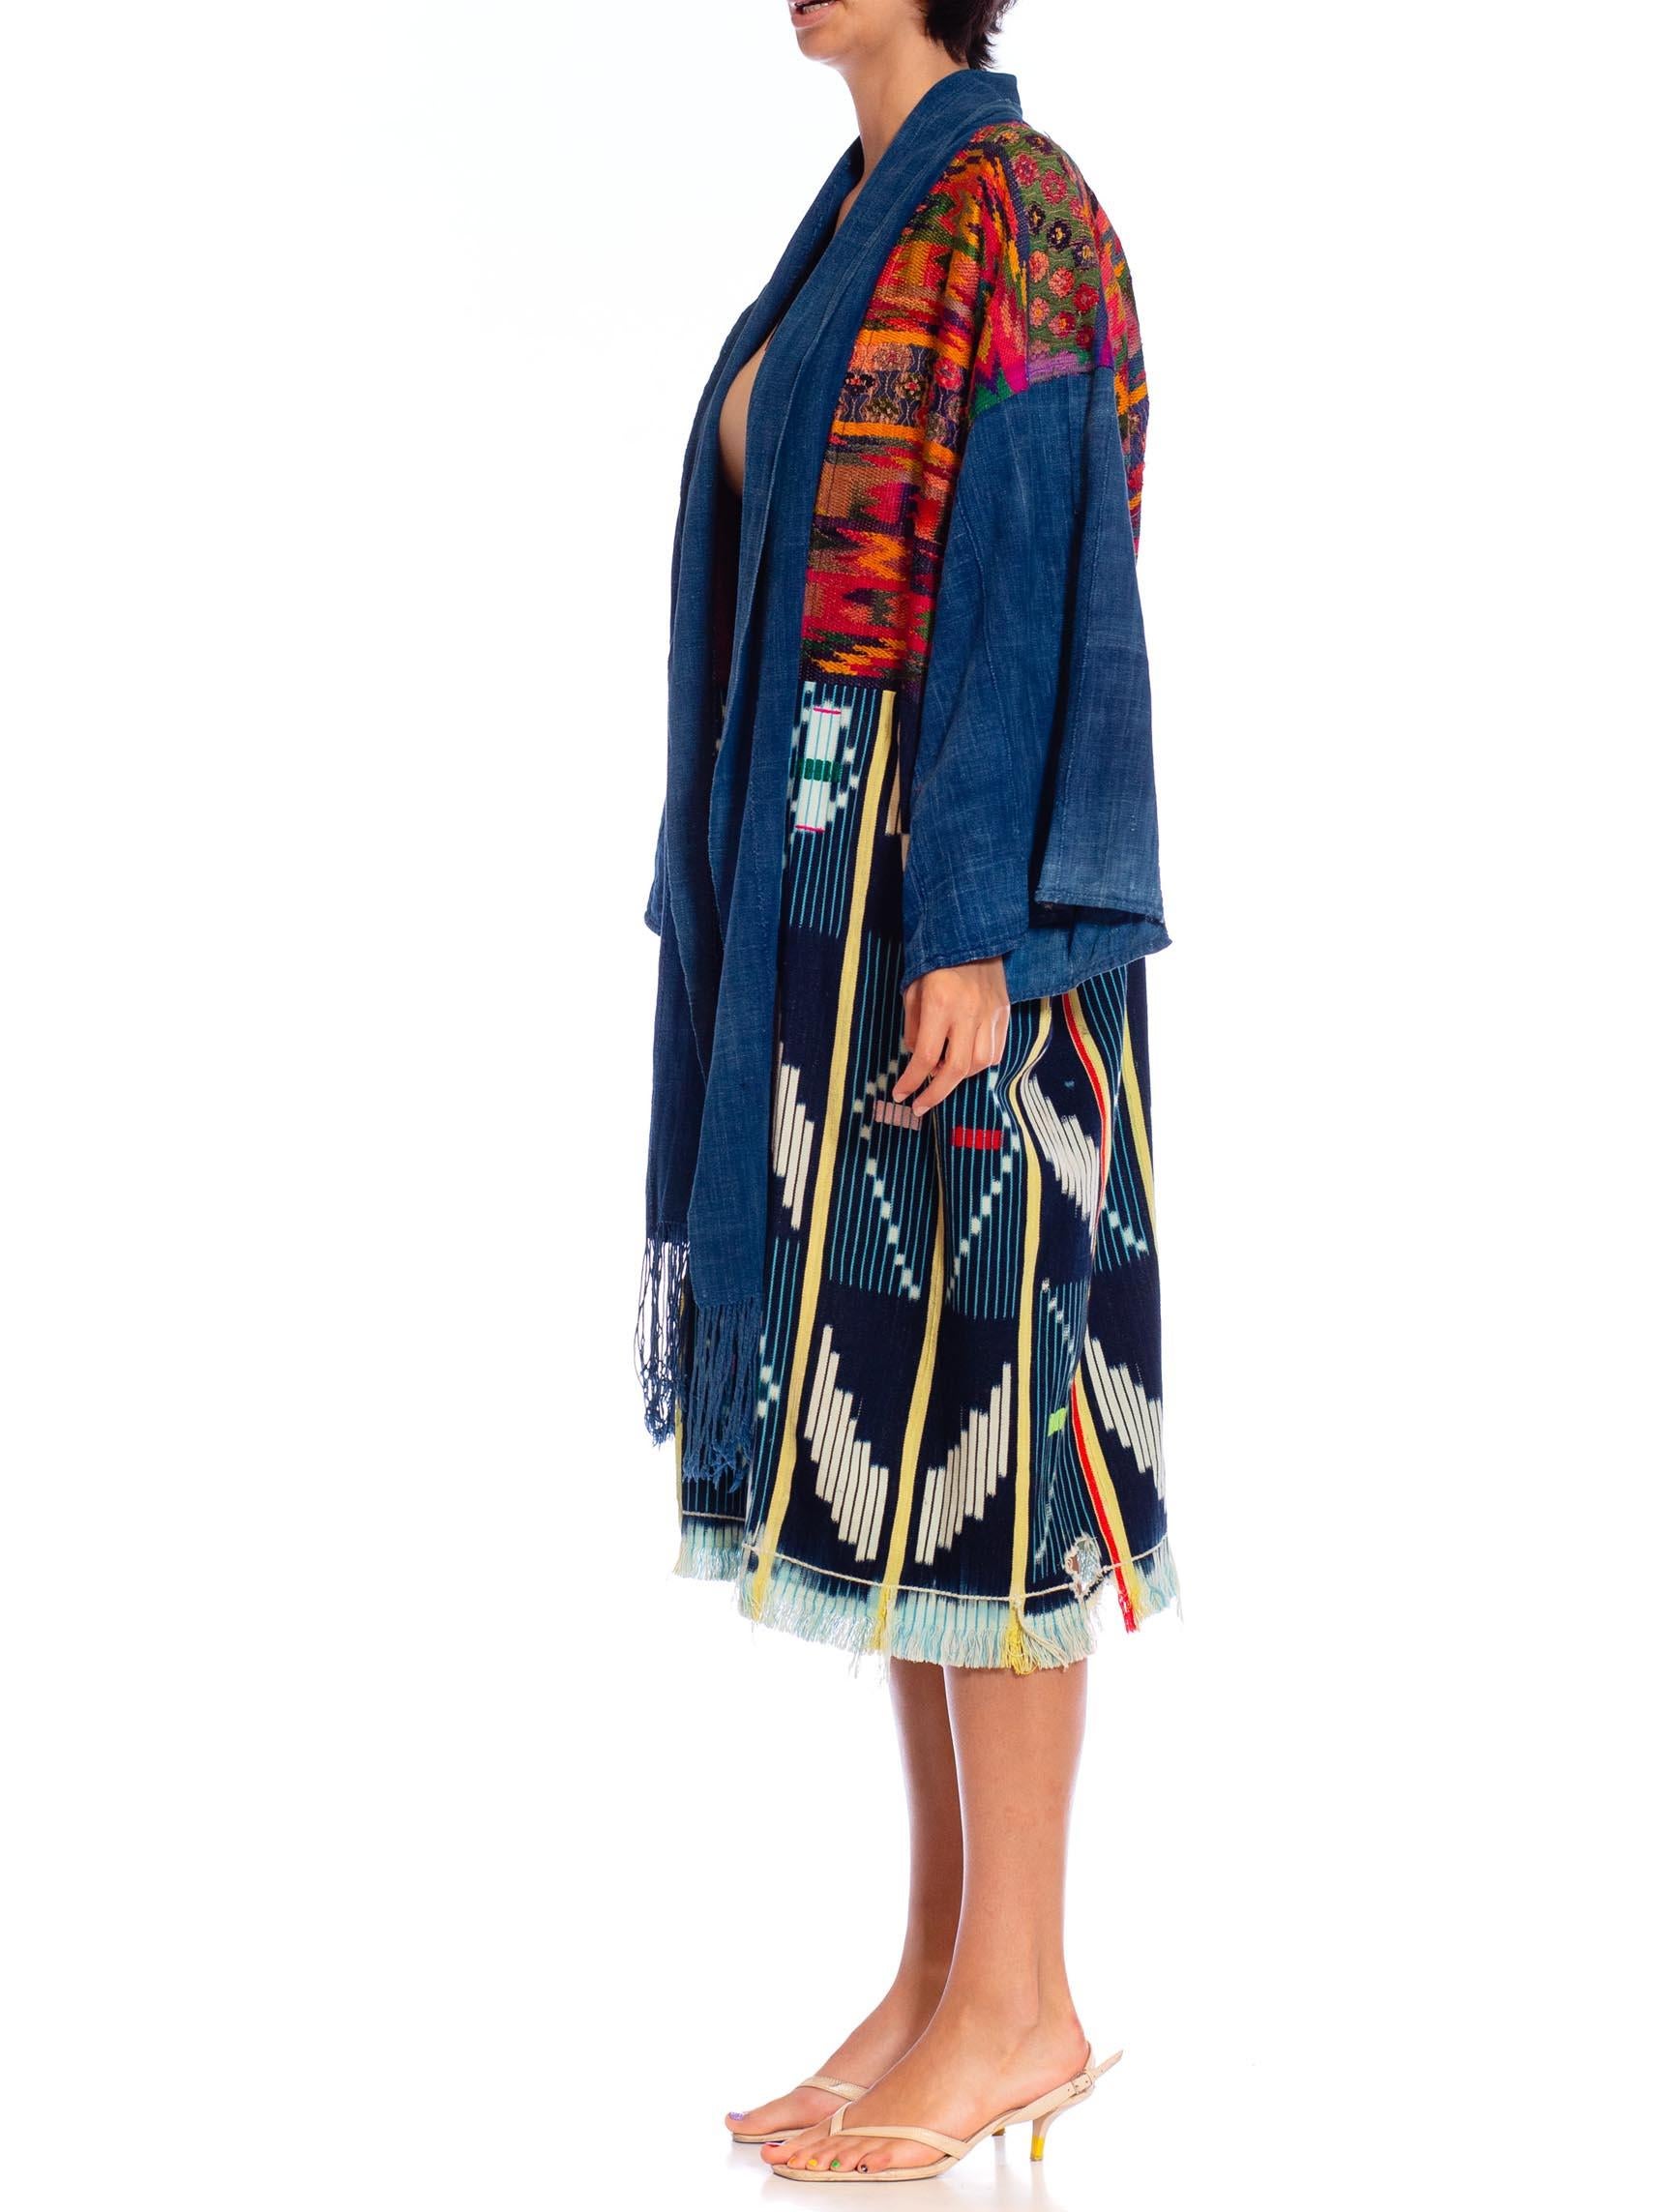 MORPHEW COLLECTION African Indigo & Antique Peruvian Embroidered Unisex Duster Beach Coat
MORPHEW COLLECTION is made entirely by hand in our NYC Ateliér of rare antique materials sourced from around the globe. Our sustainable vintage materials